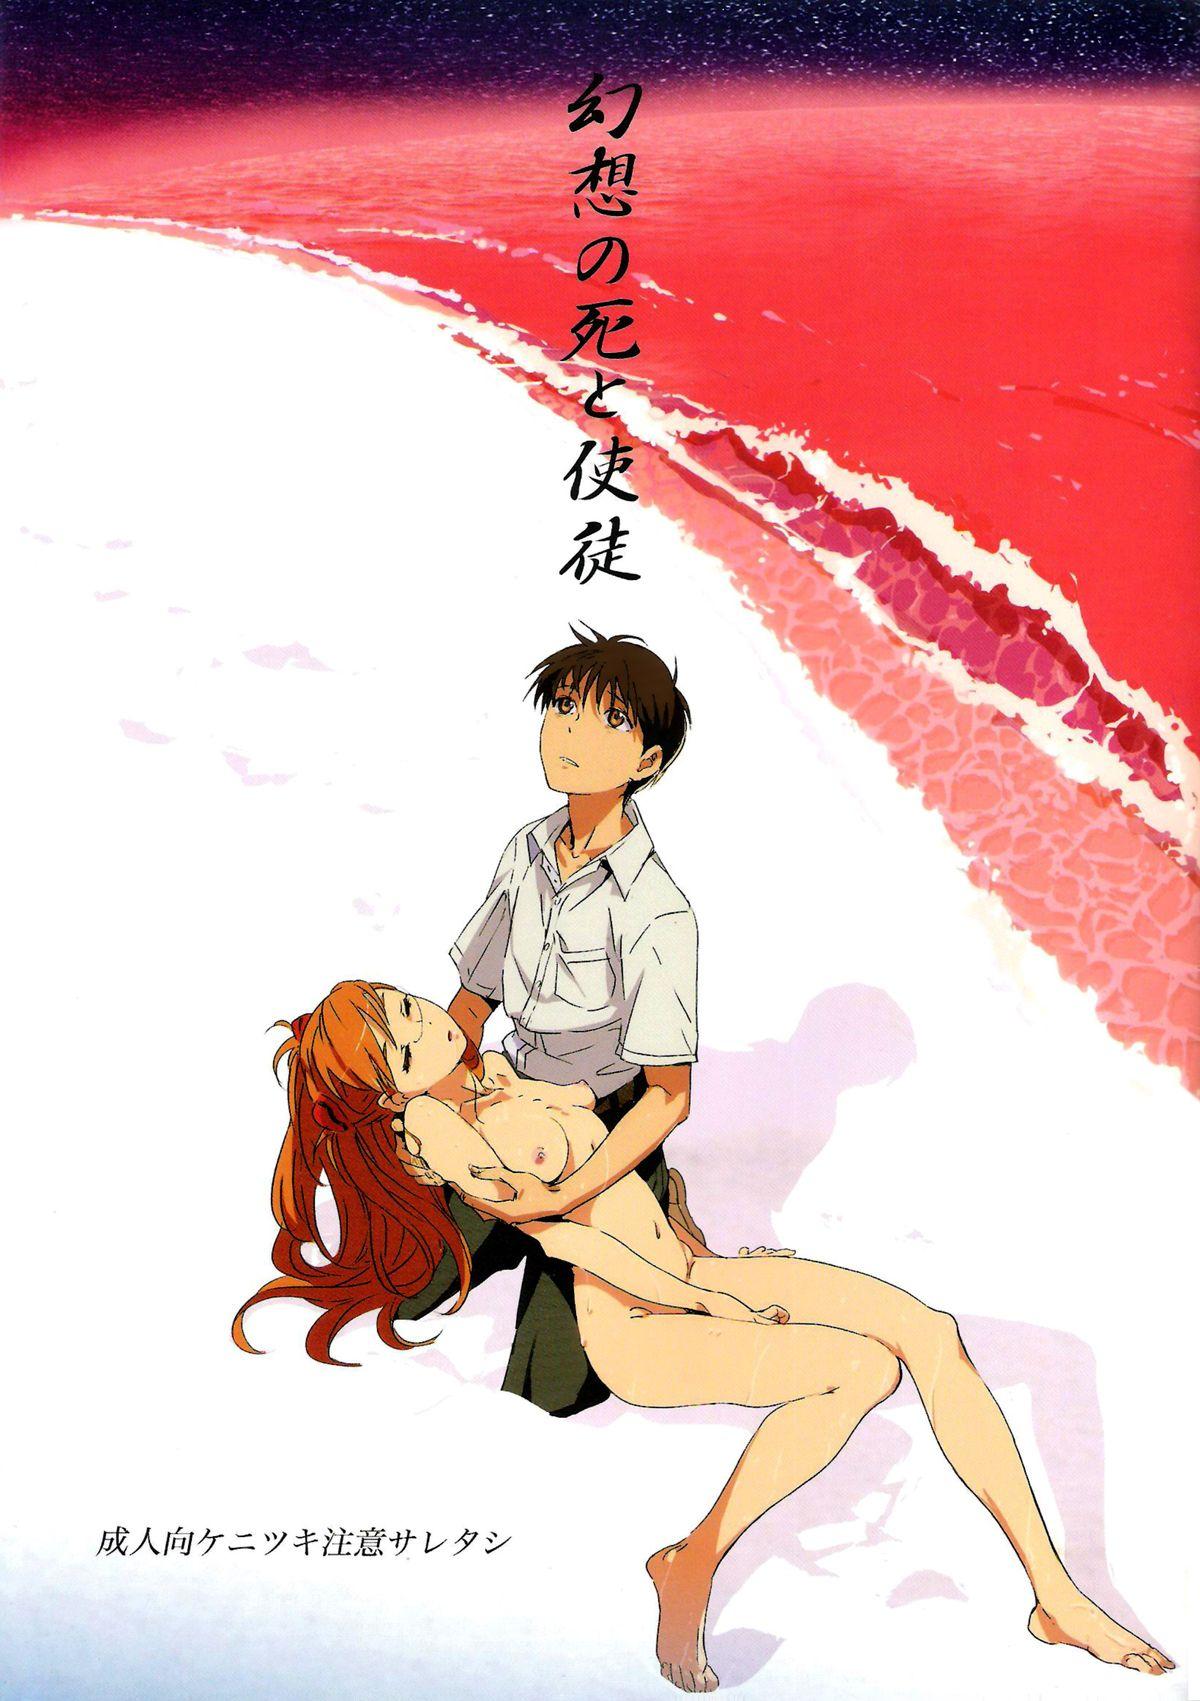 Amature Sex Gensou no Shi to Shito | Death of Illusion and an Angel - Neon genesis evangelion Mediumtits - Page 1